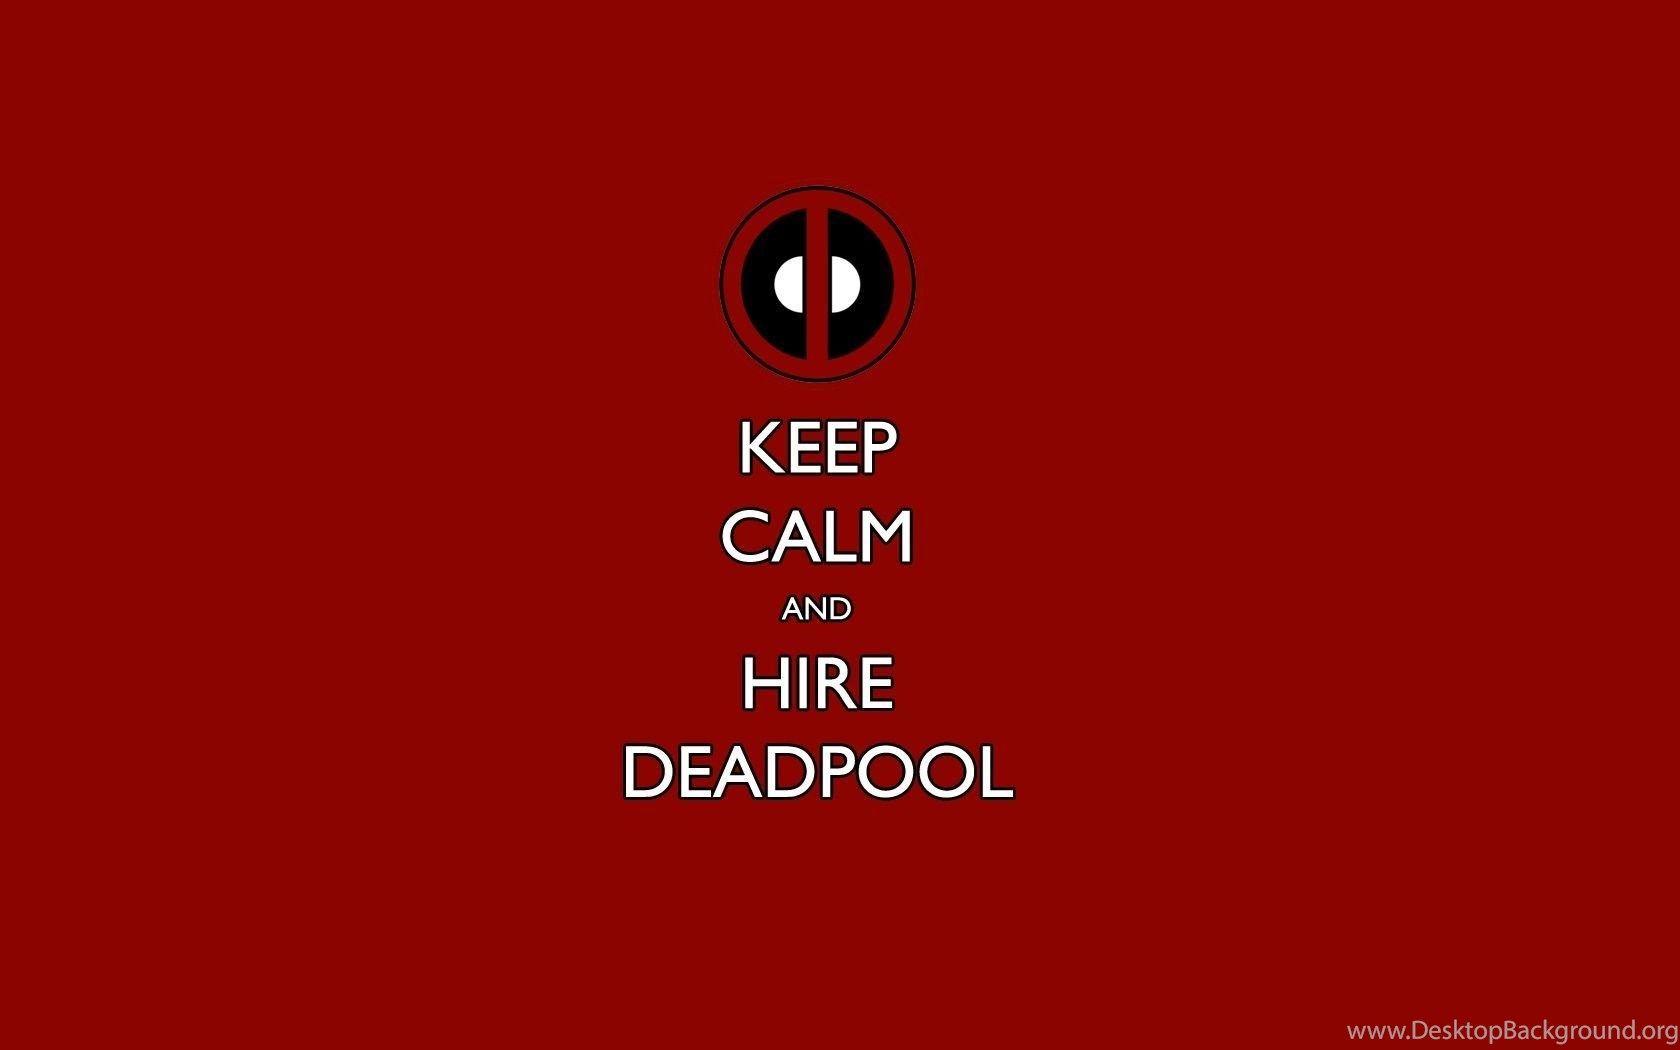 Deadpool Wallpaper >> Background With Quality HD Desktop Background